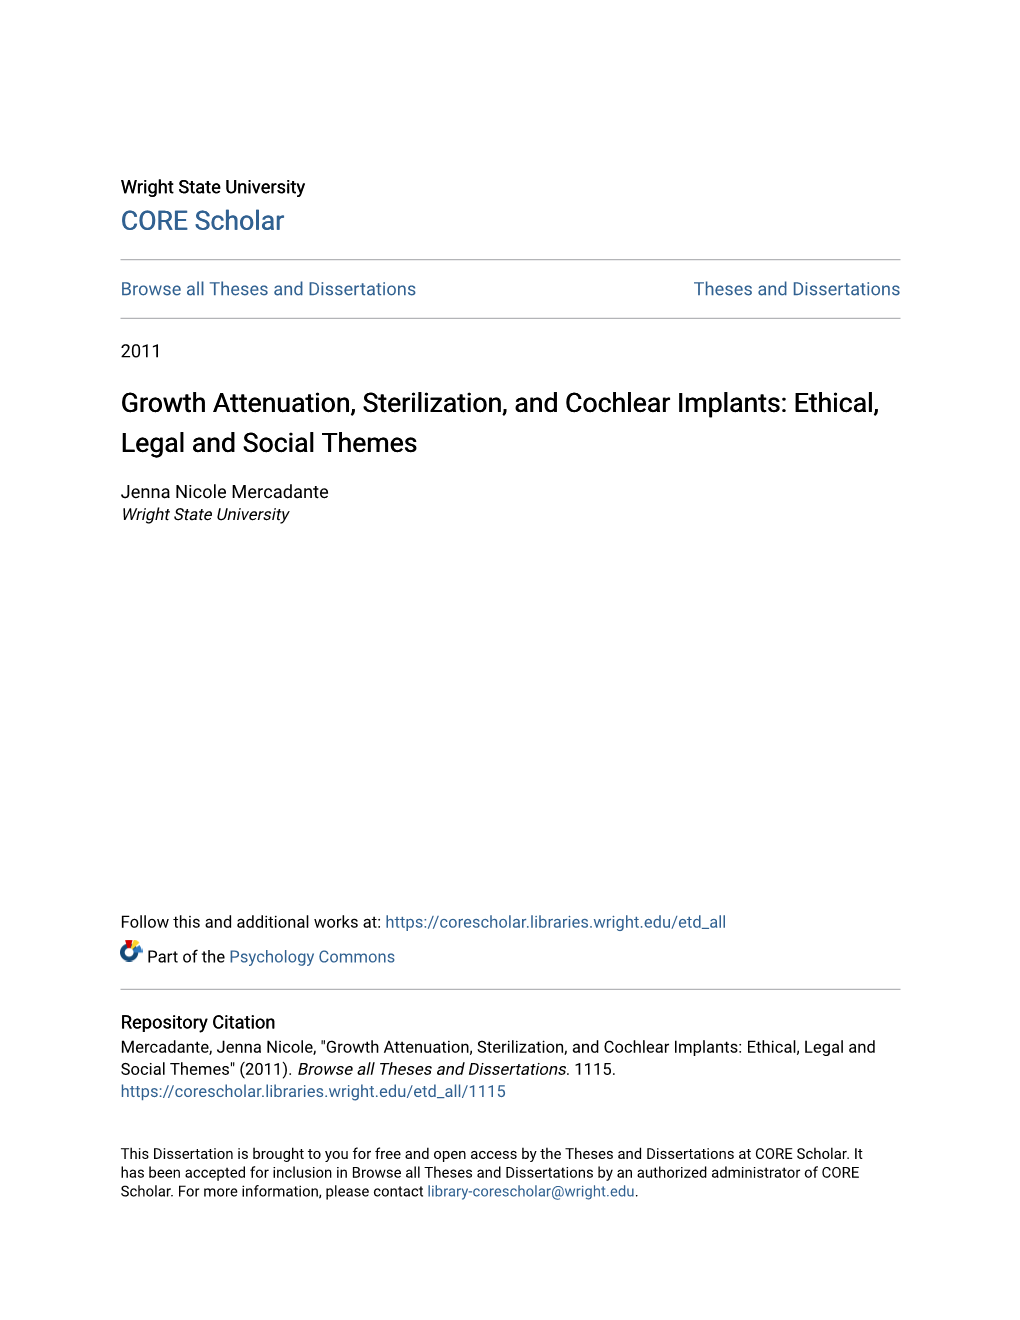 Growth Attenuation, Sterilization, and Cochlear Implants: Ethical, Legal and Social Themes